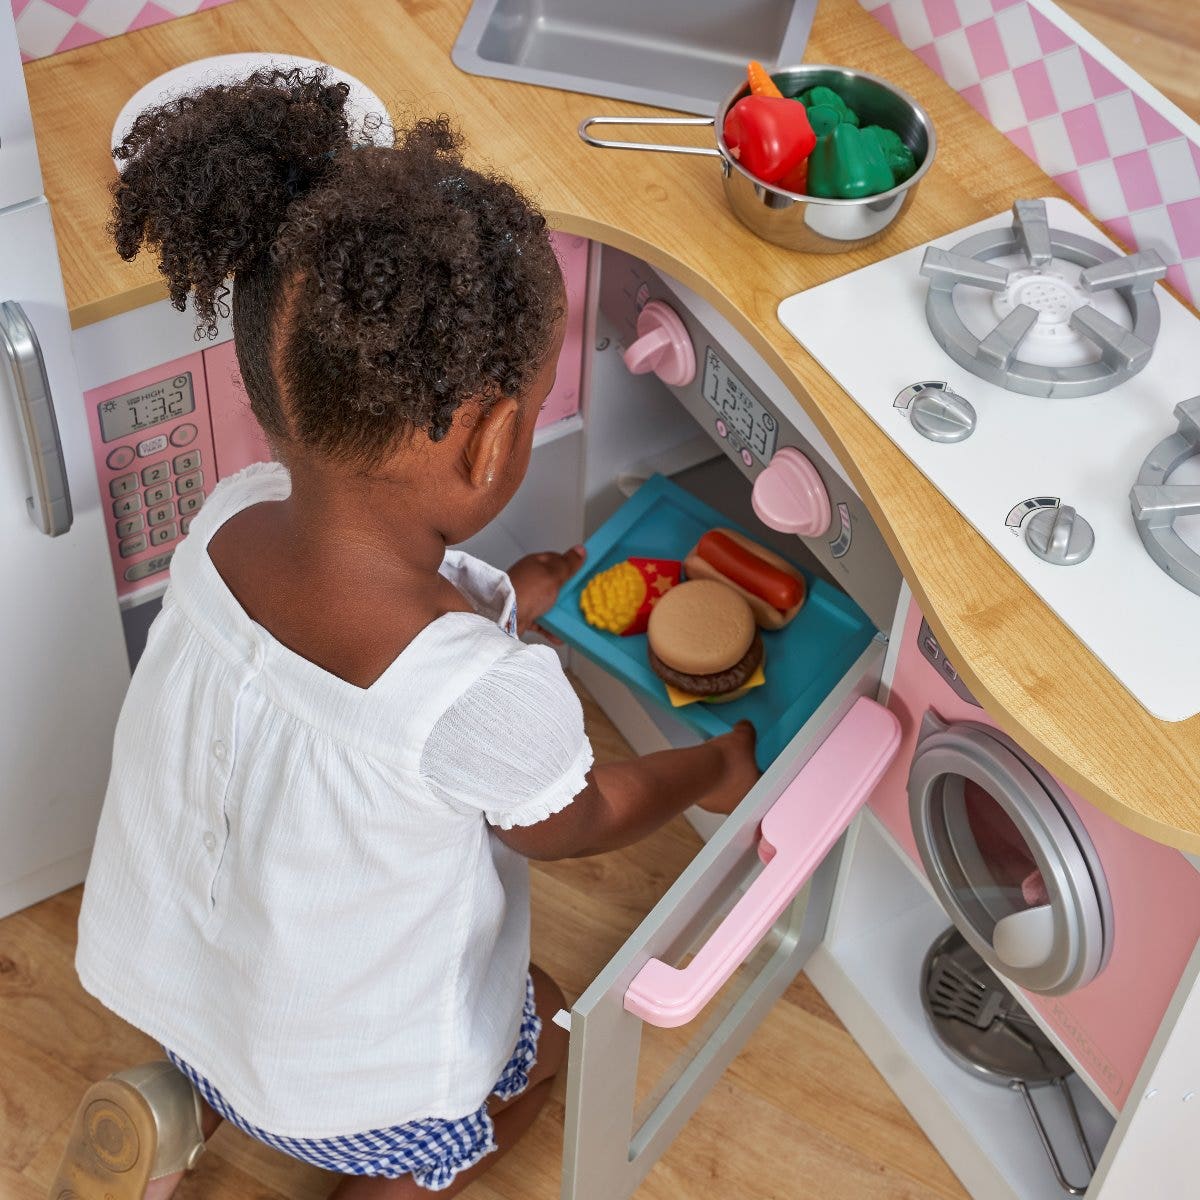 Hands-On Fun: Working doors on washer, oven, microwave, refrigerator and freezer lets kids re-enact everyday household moments.